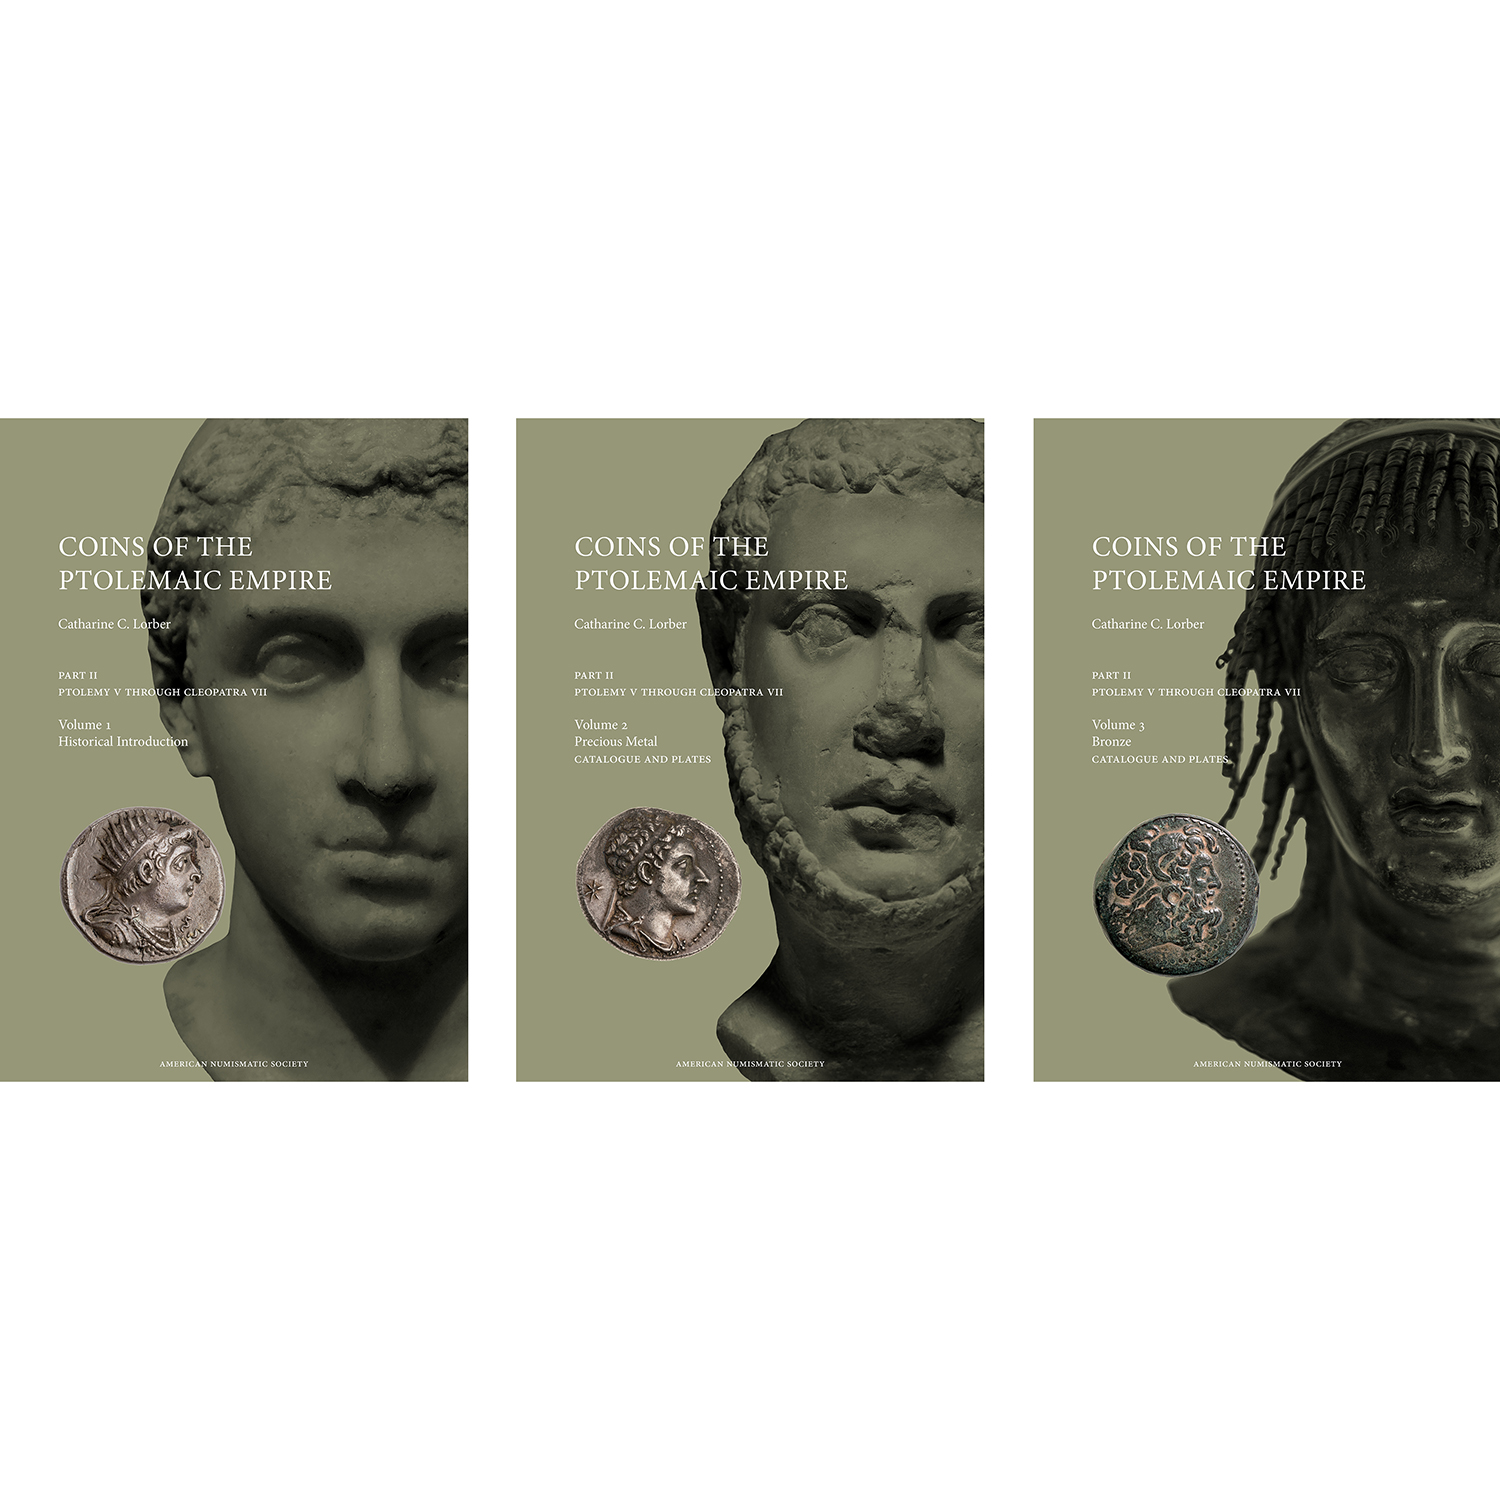 Announcing Coins of the Ptolemaic Empire, Part II